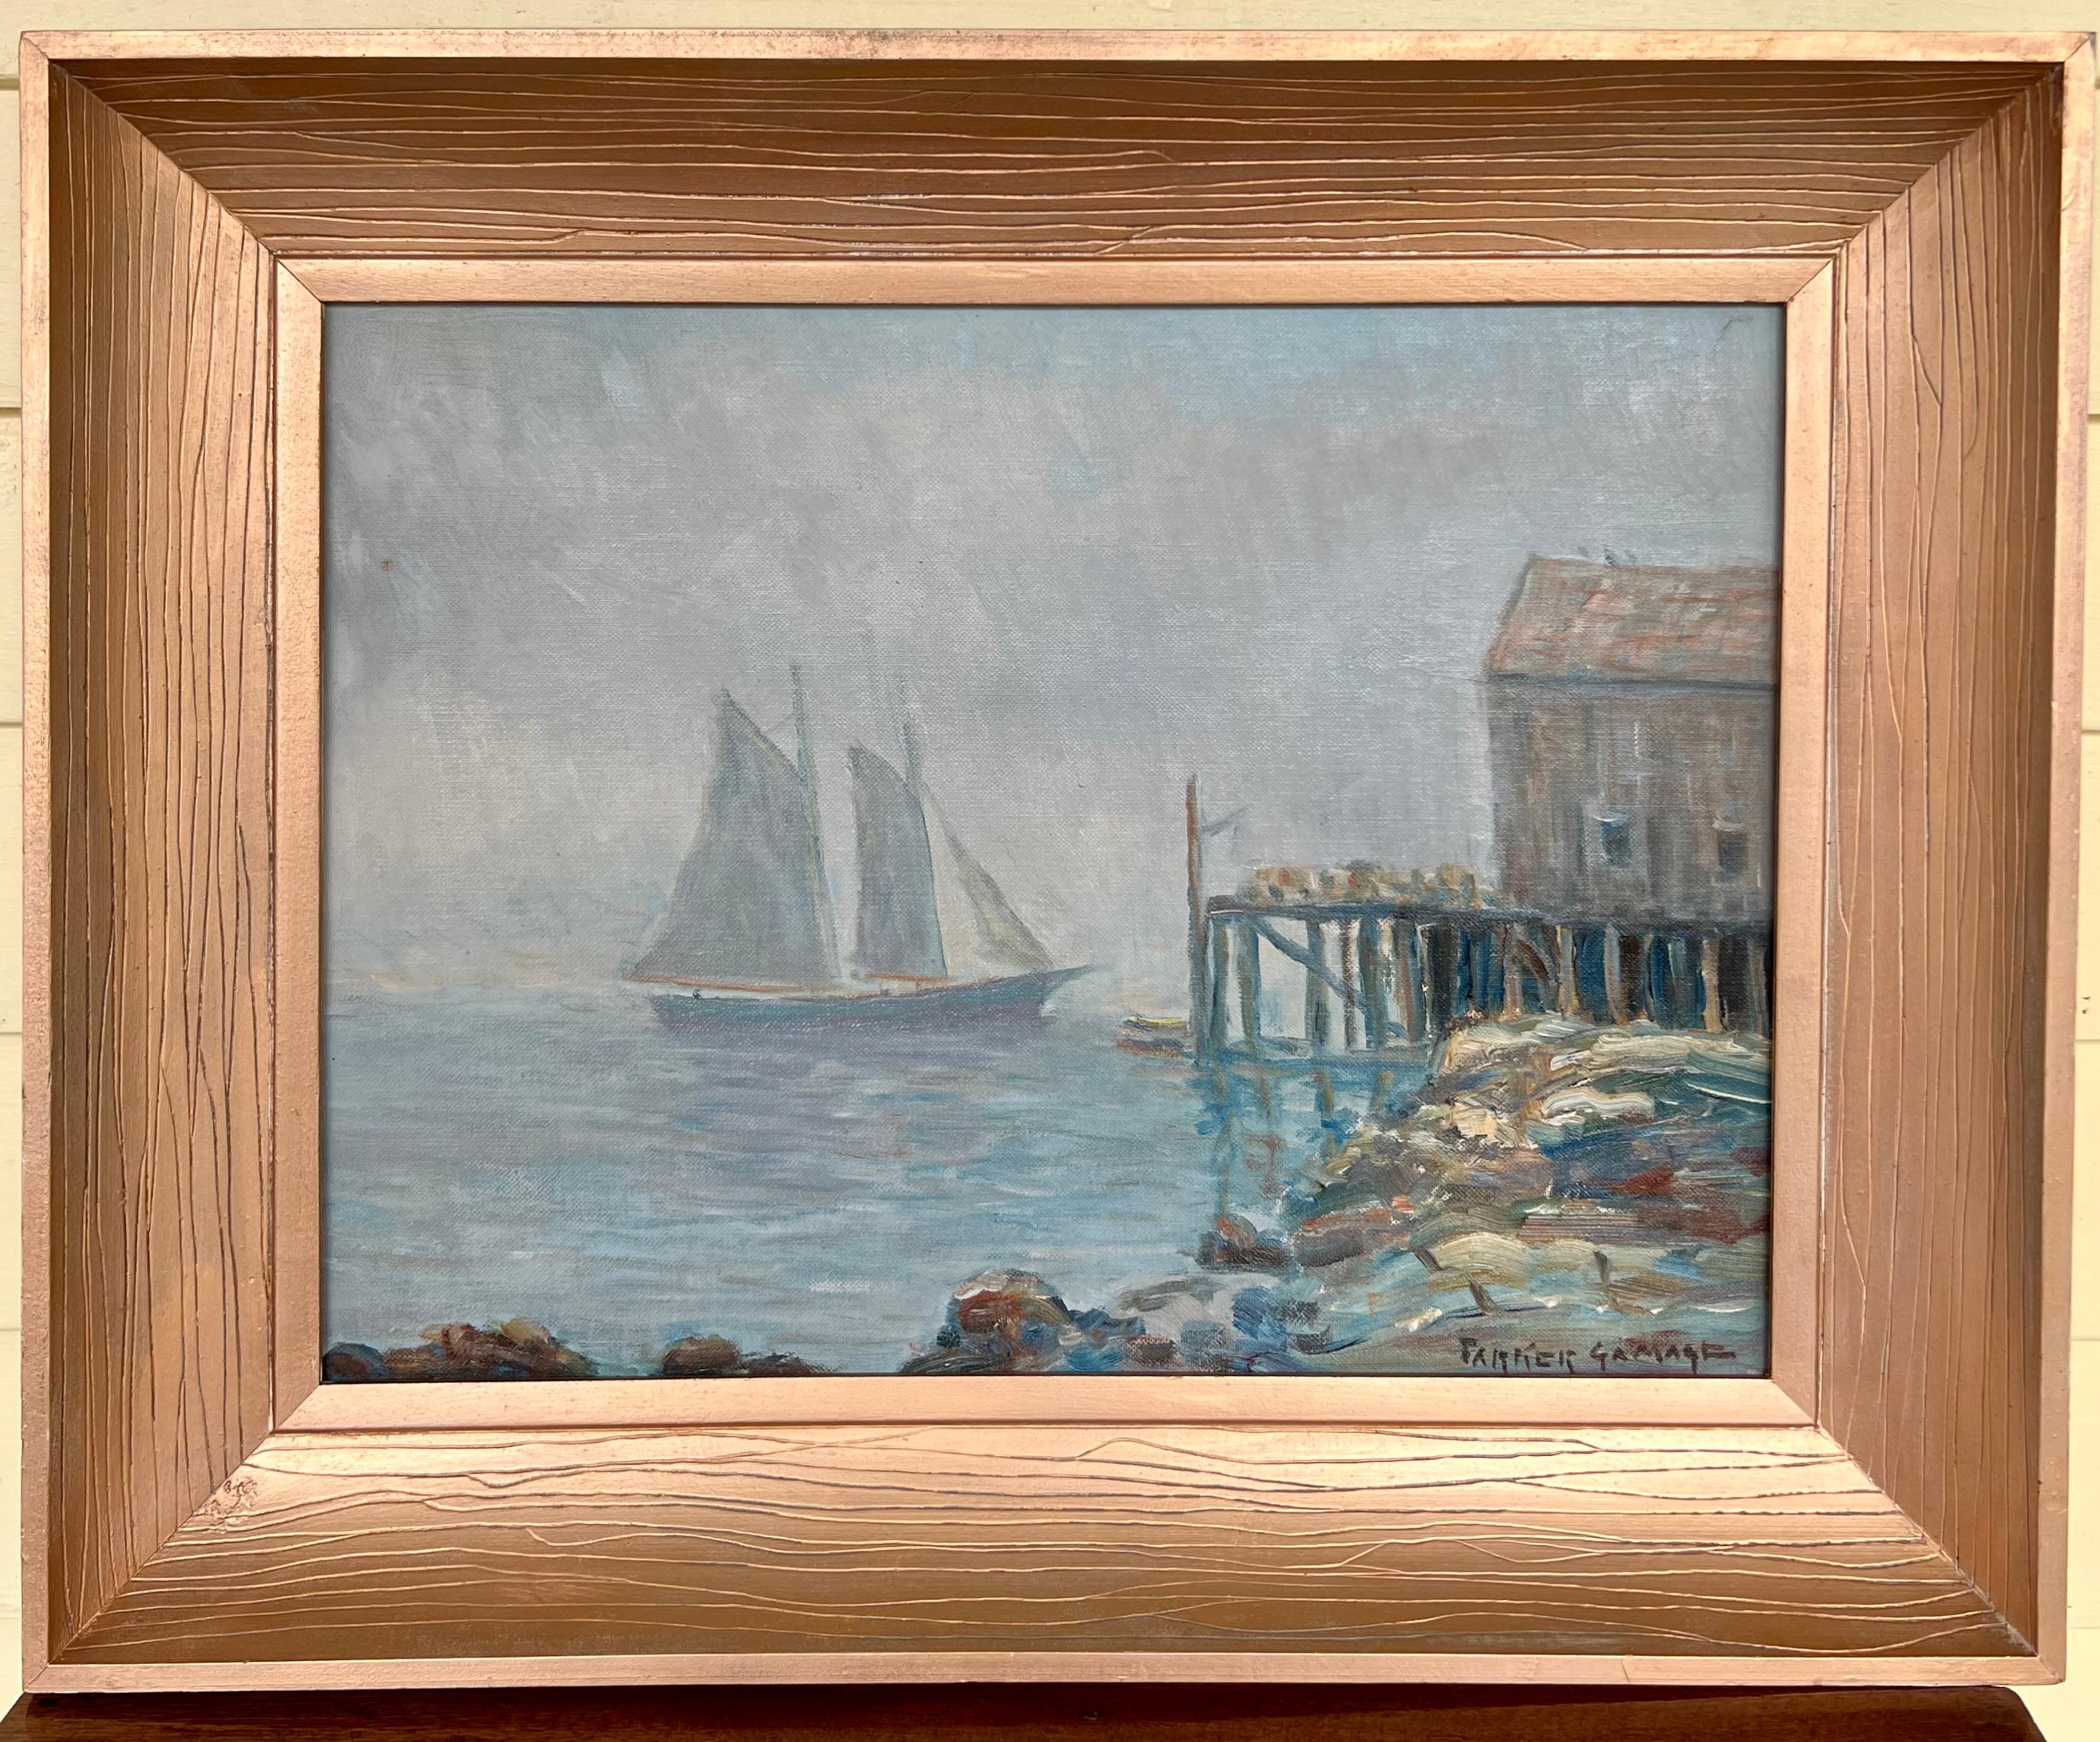 Atmospheric mid-century painting of Mid-coast Maine. Oil on artist panel, signed in the lower right and. dated and inscribed on the reverse. 

Parker Gamage (1882-1960)
A New Harbor, Maine resident for most of his life, Gamage was a student of